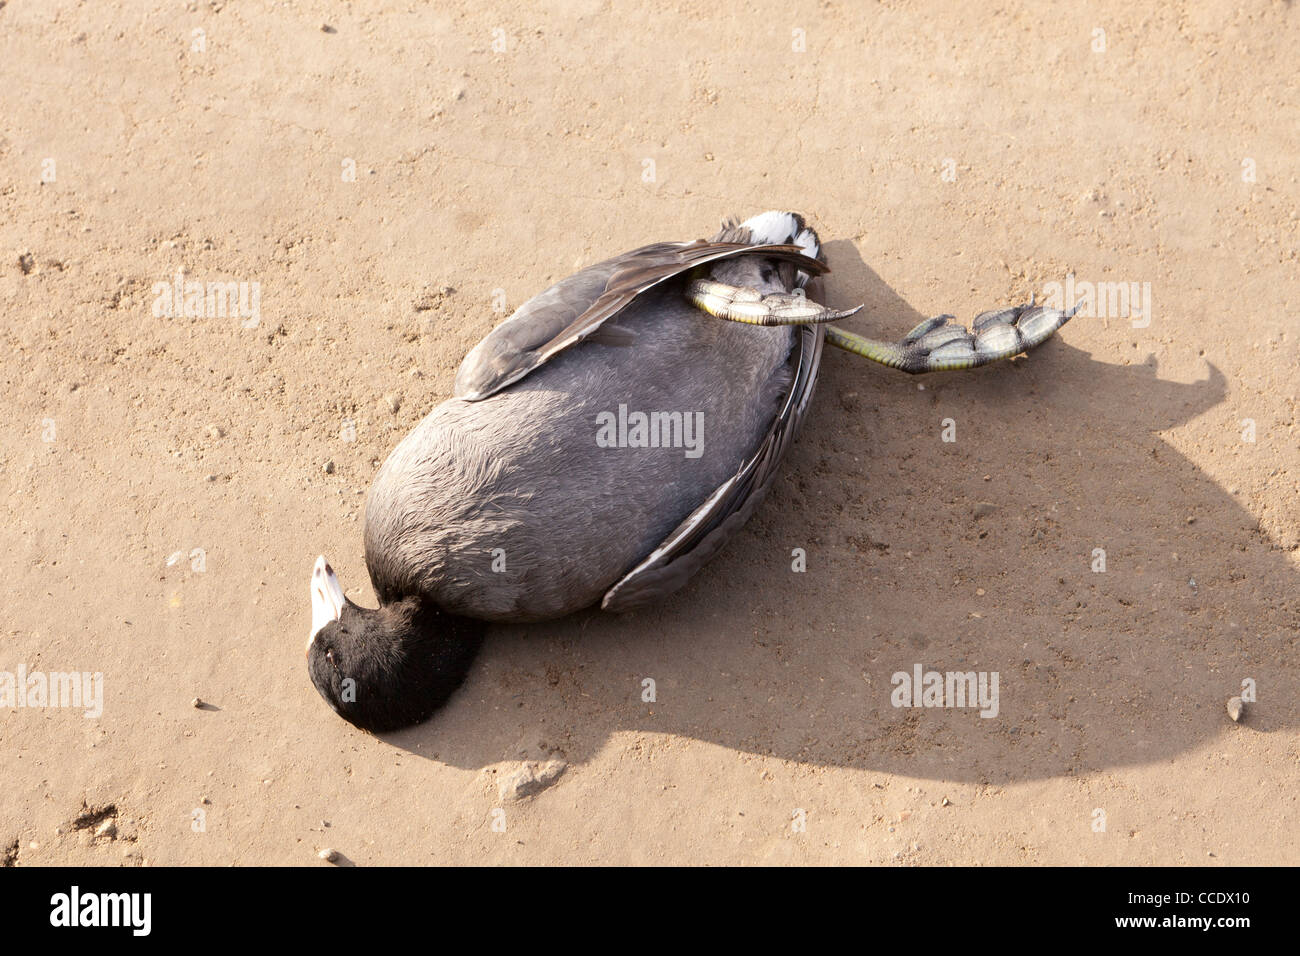 Dead American Coot on dirt road Stock Photo